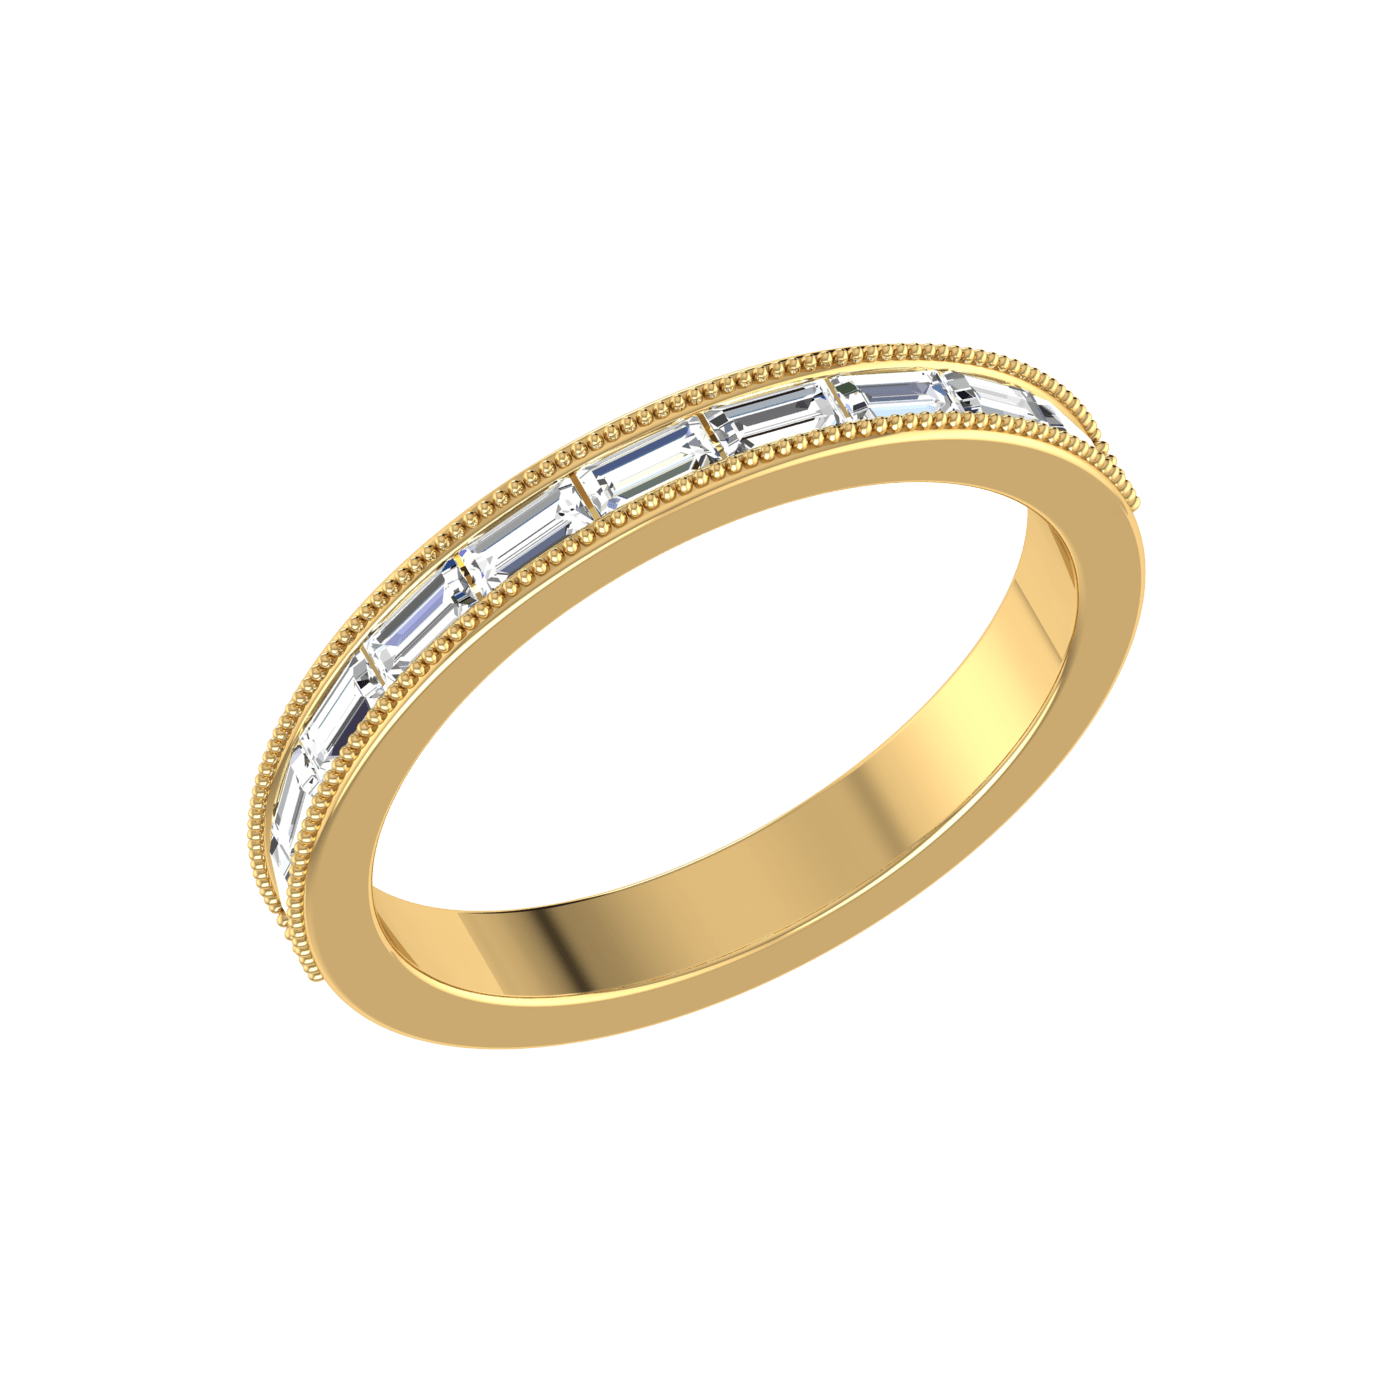 How Much Are Gold Wedding Bands Worth? | Cash for Gold Mailer